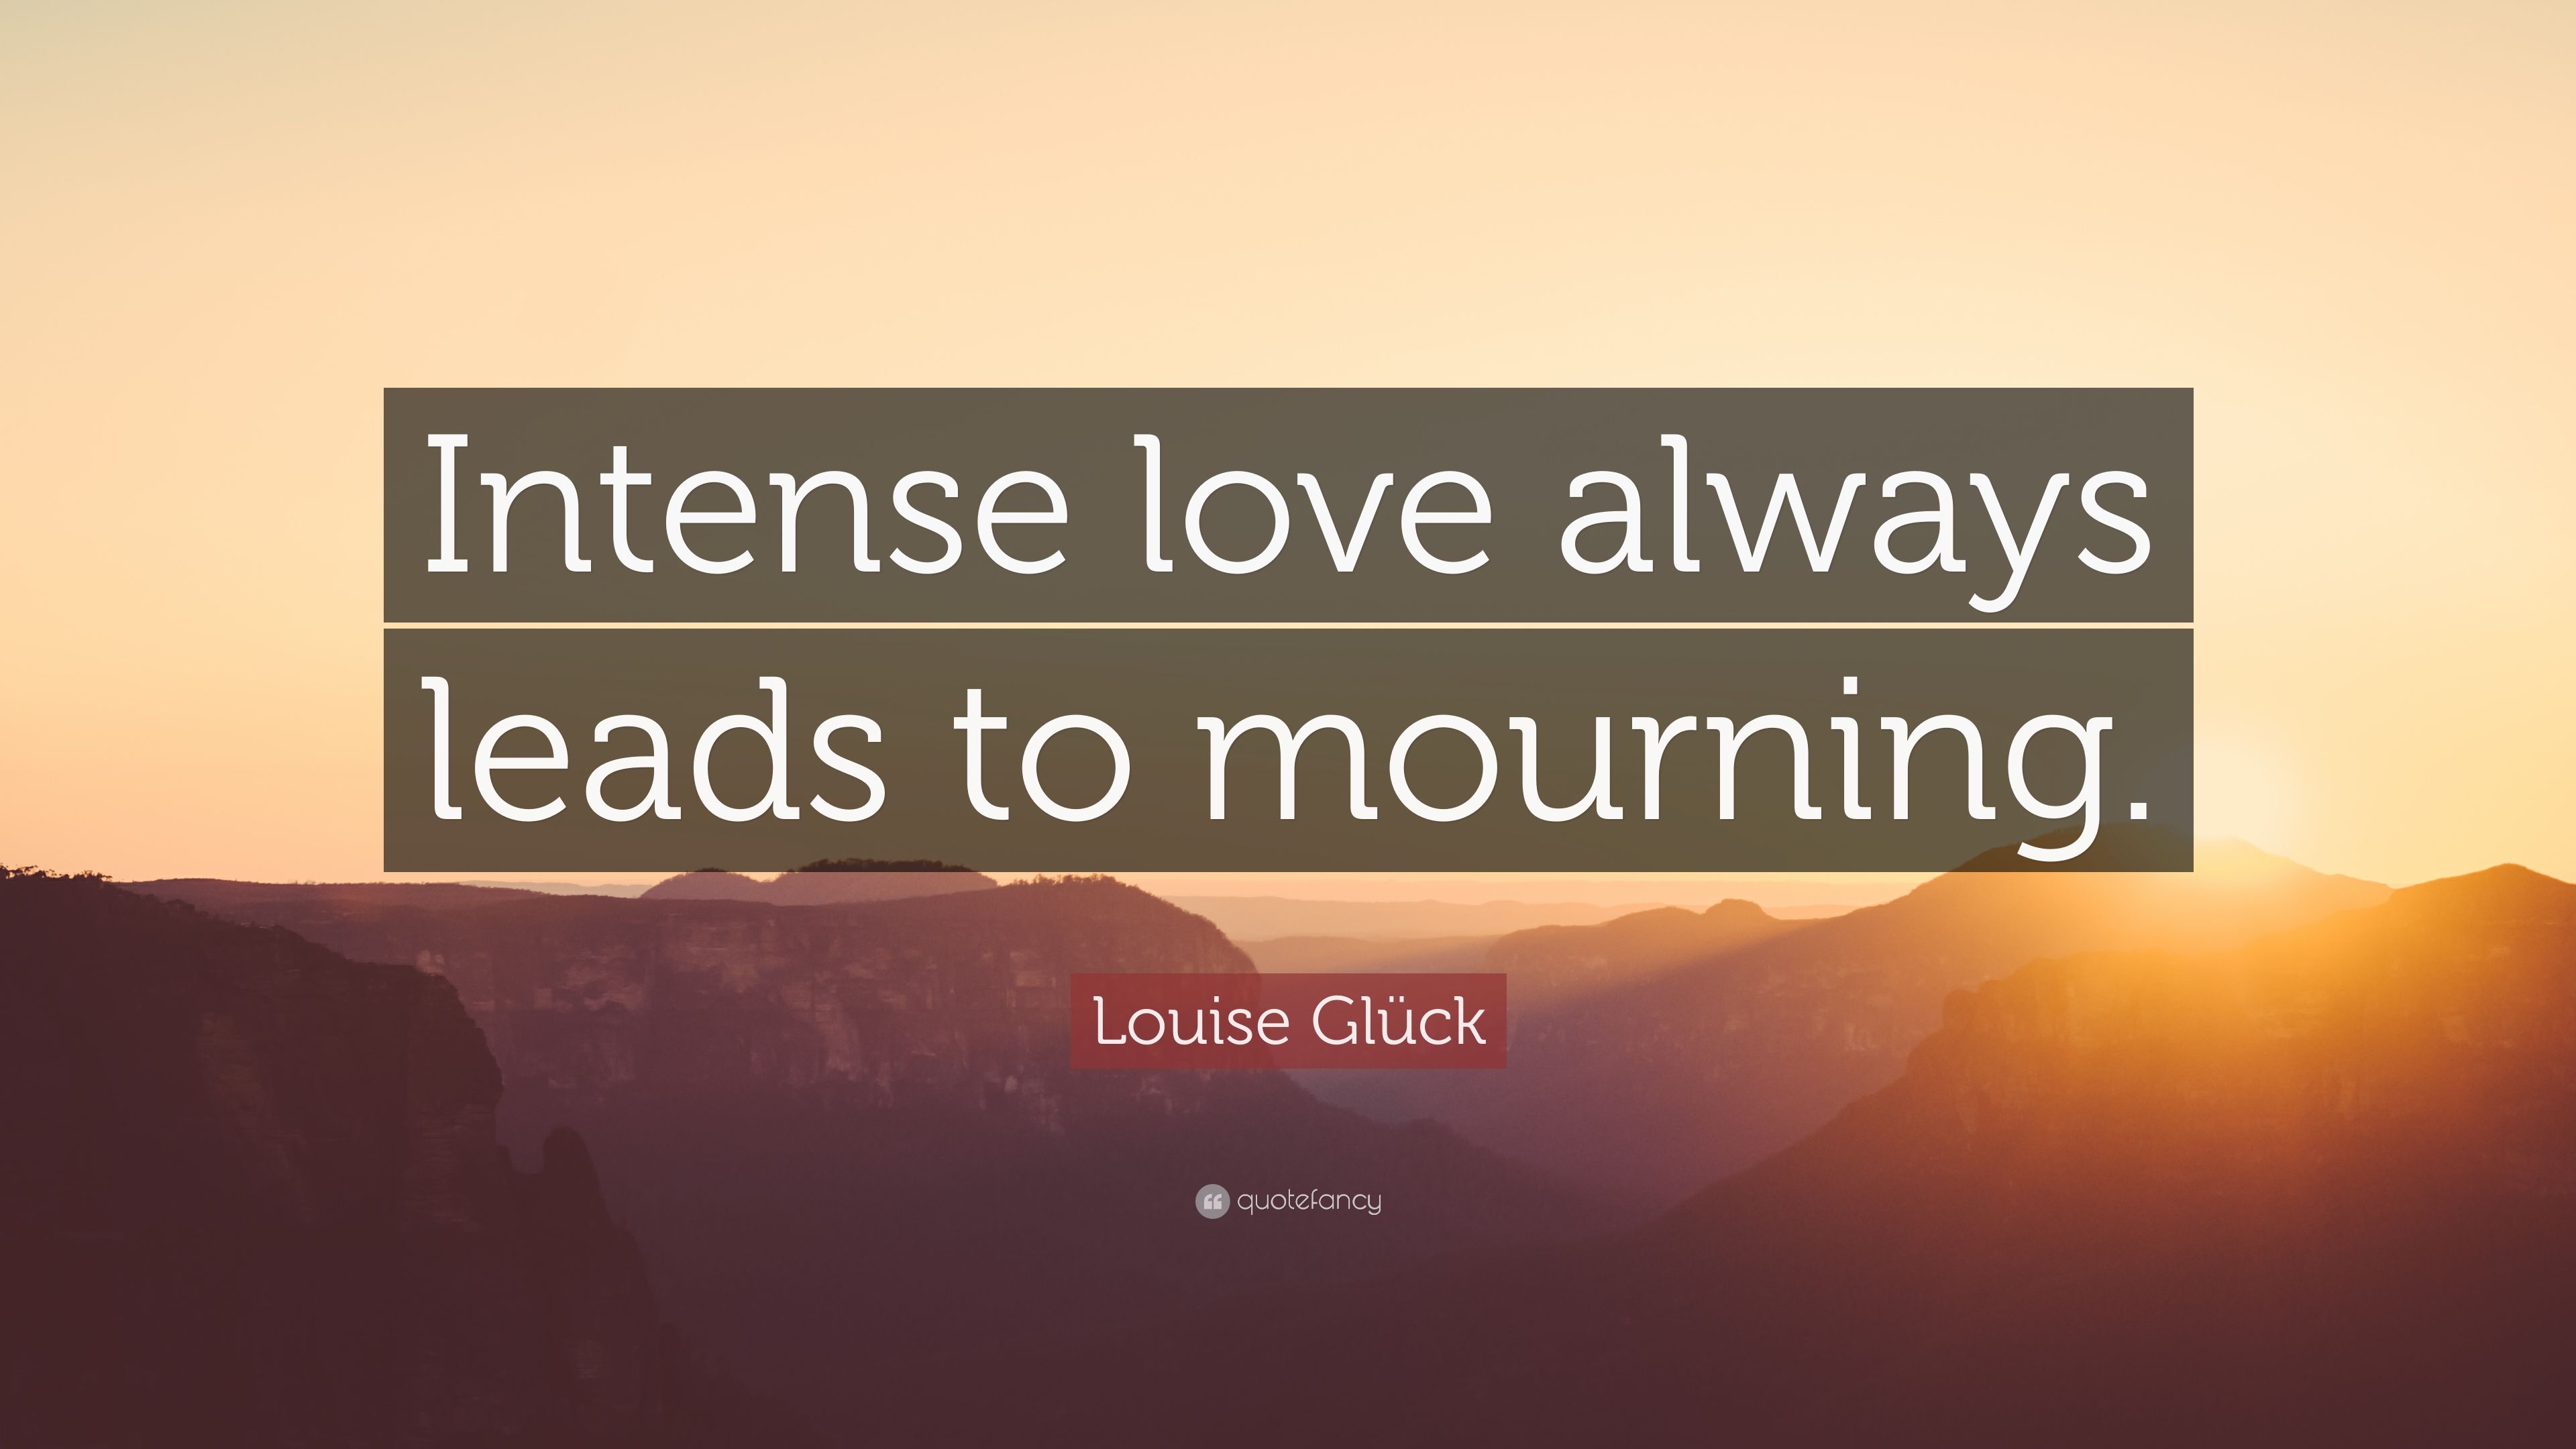 Louise Glück Quote: “Intense love always leads to mourning.” 7